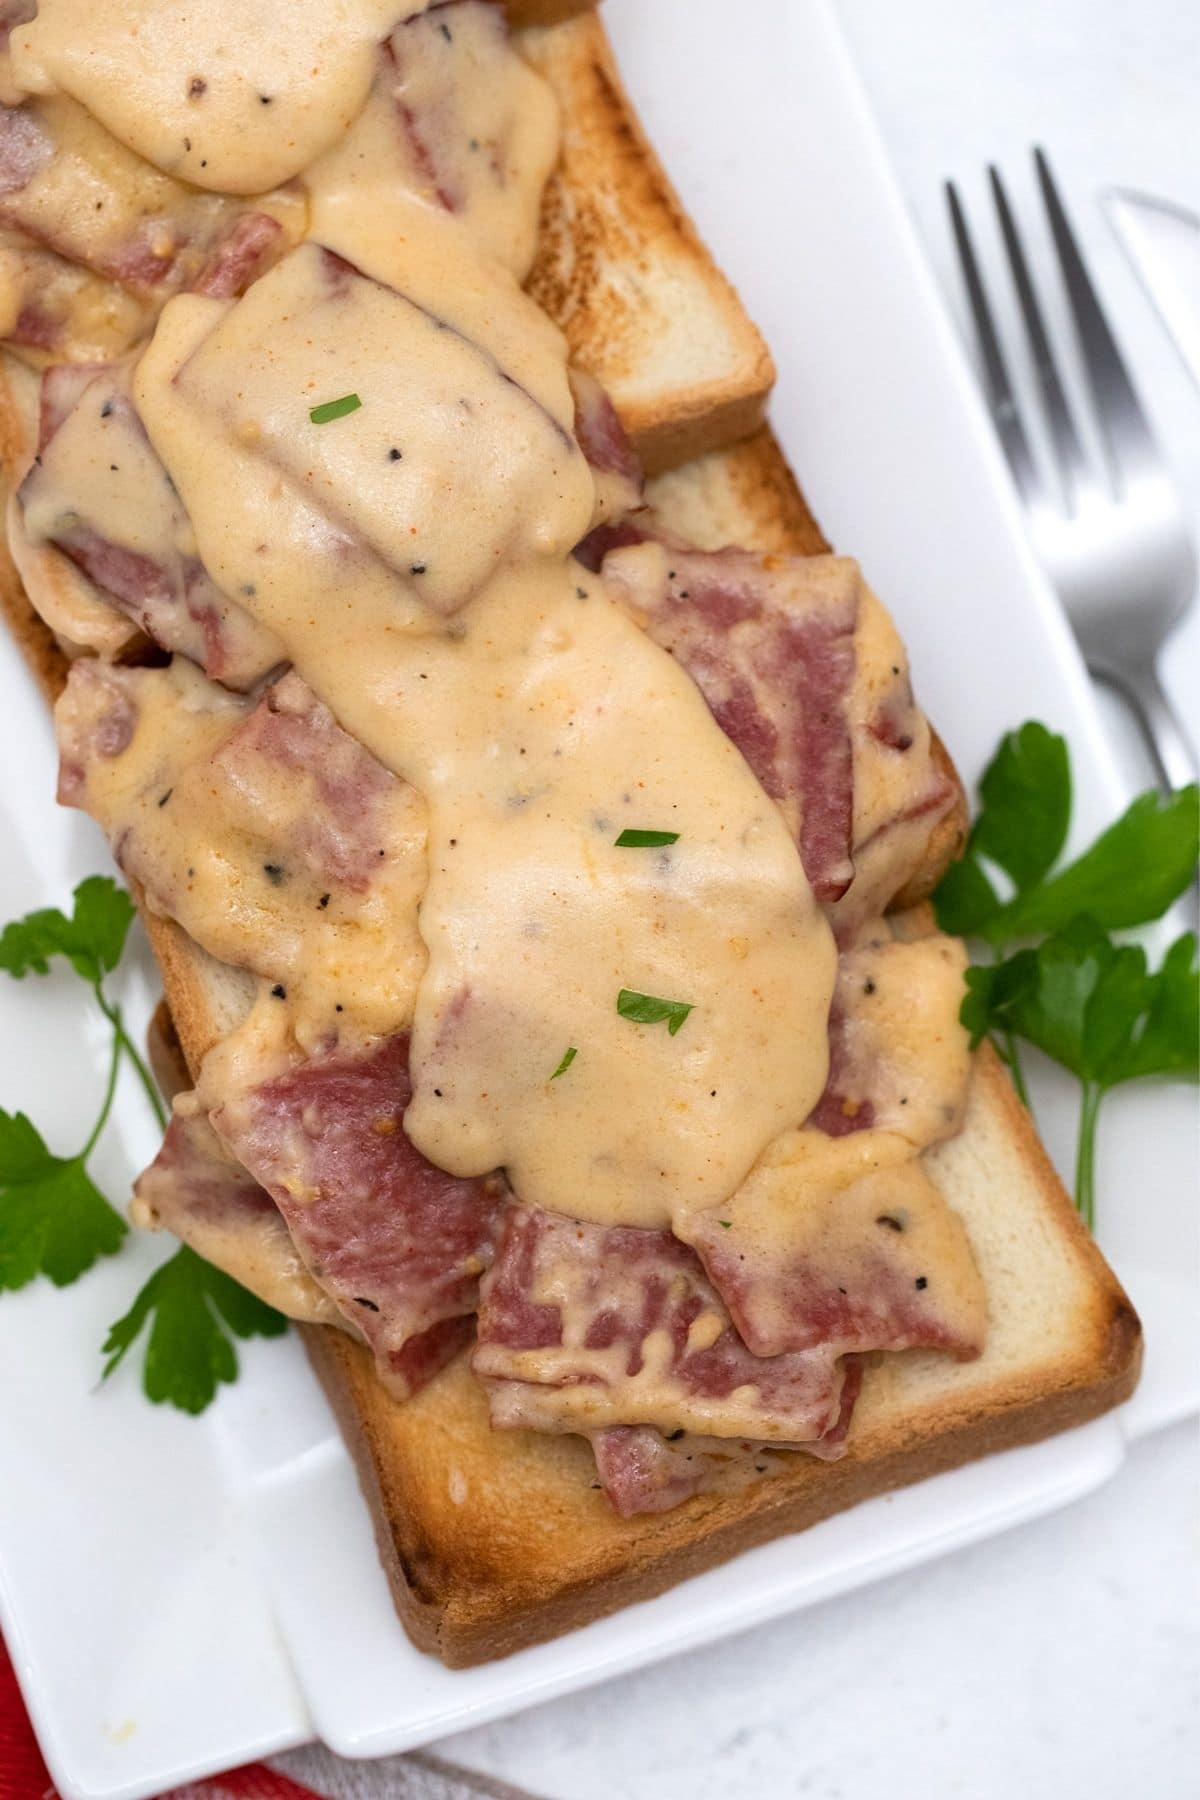 chipped beef and gravy over toast on white plate